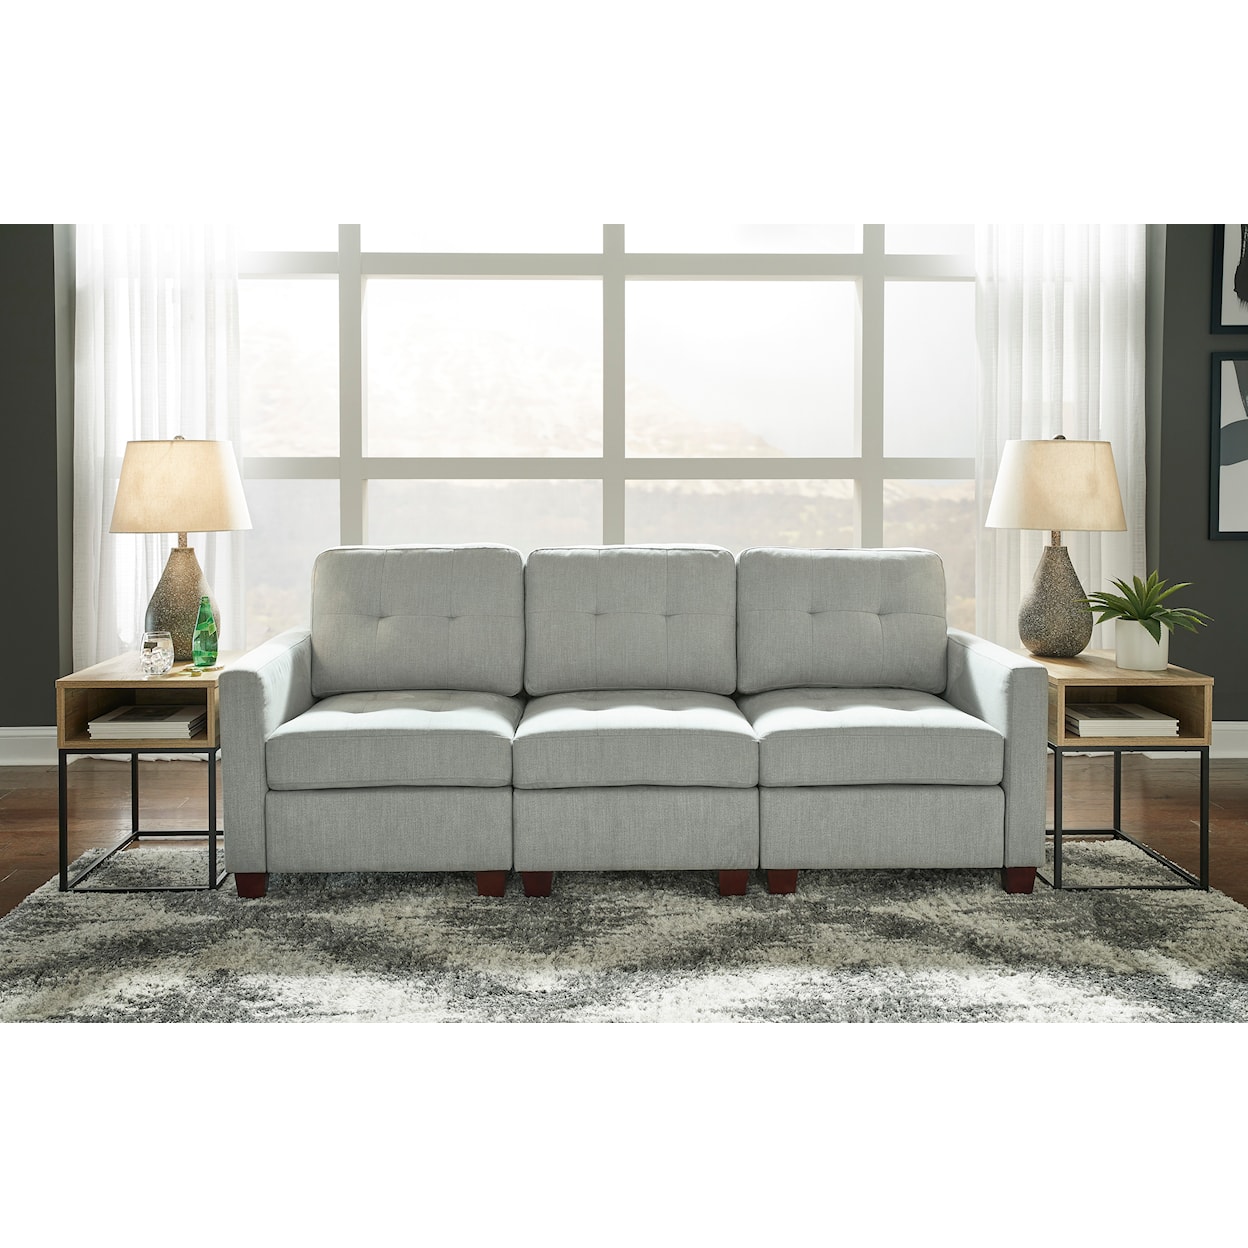 Signature Design by Ashley Edlie 3-Piece Sectional